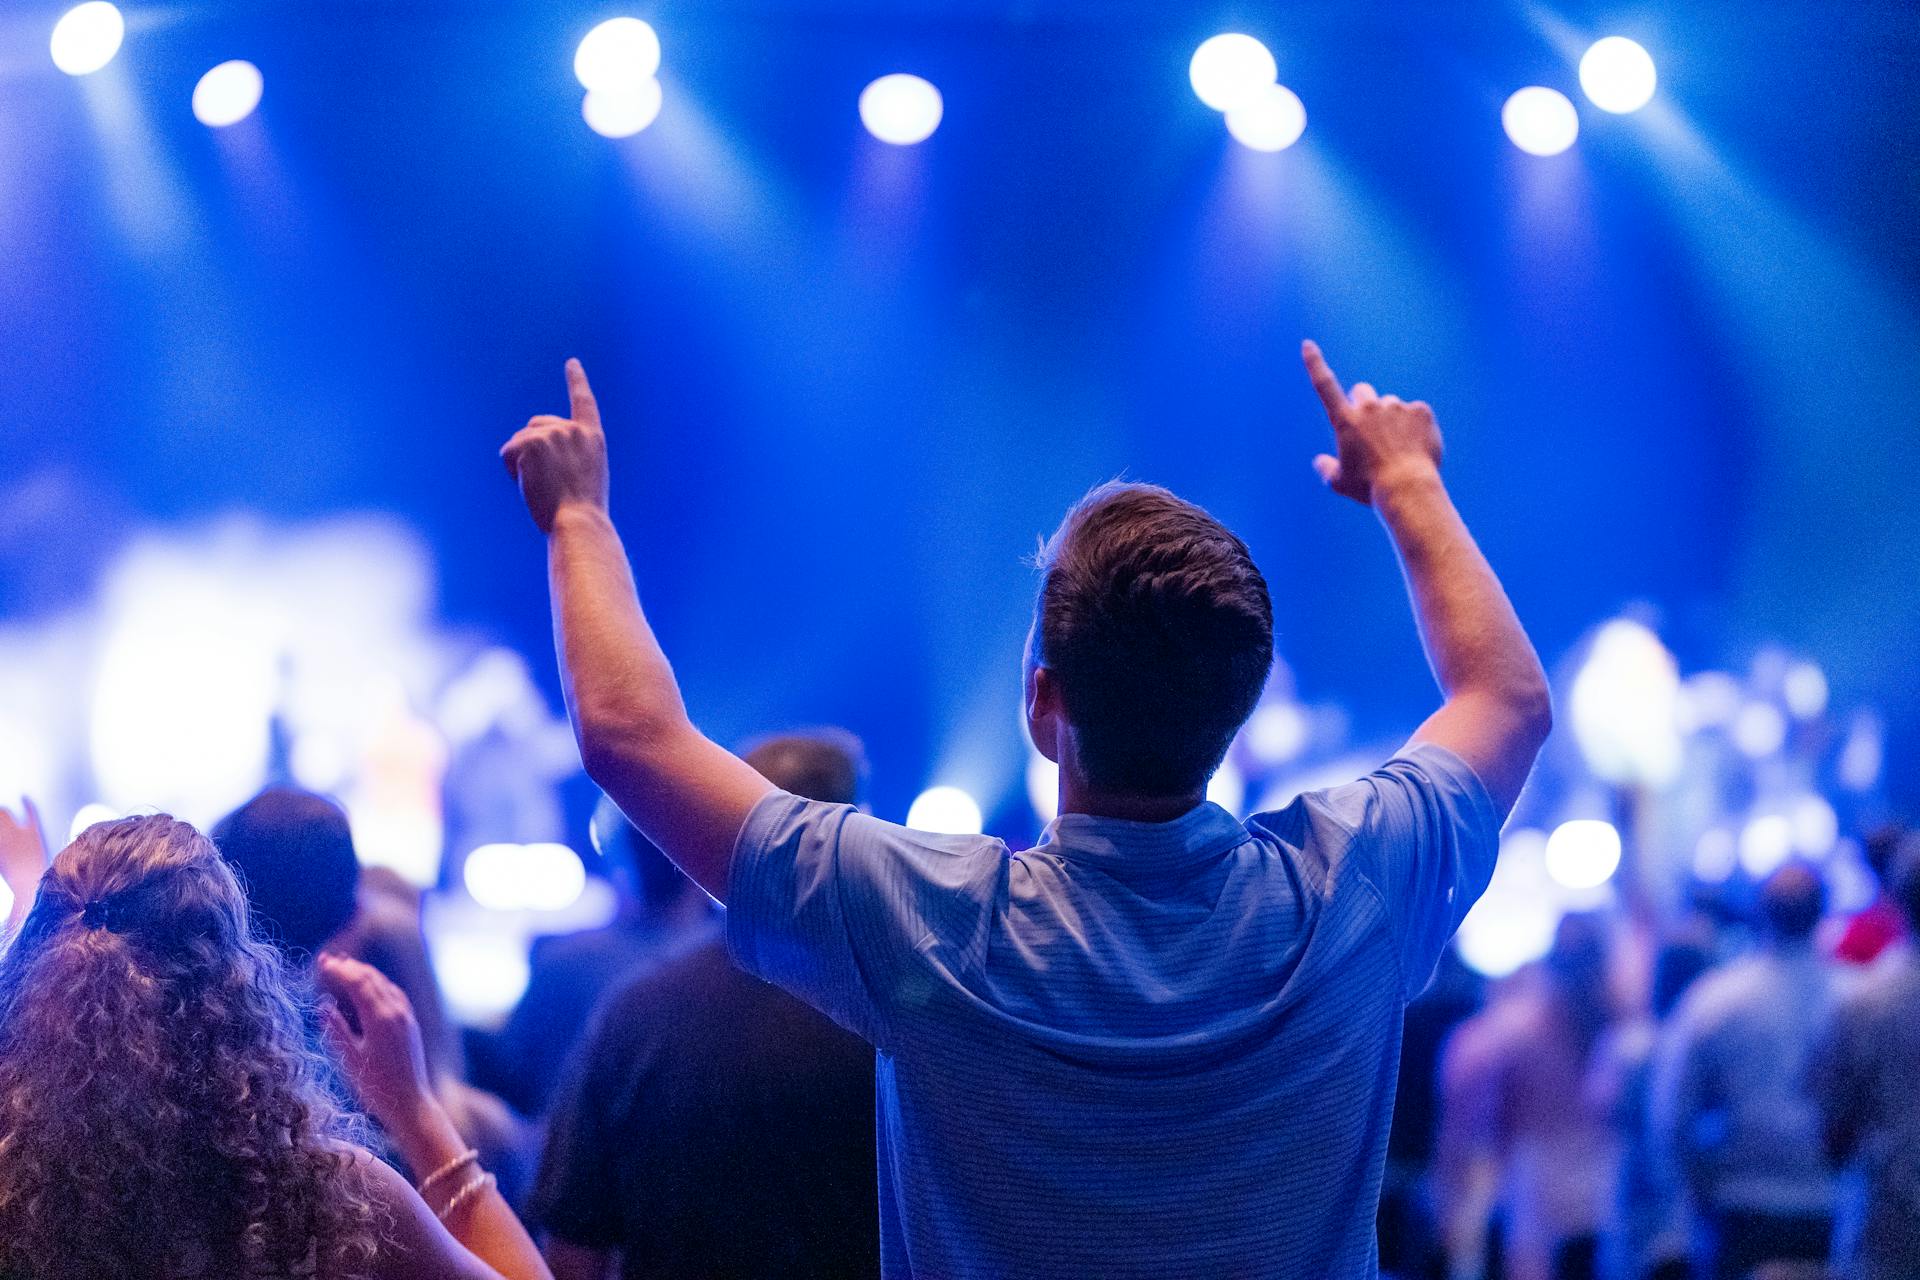 A man in a blue shirt raising his hands during a concert | Source: Pexels